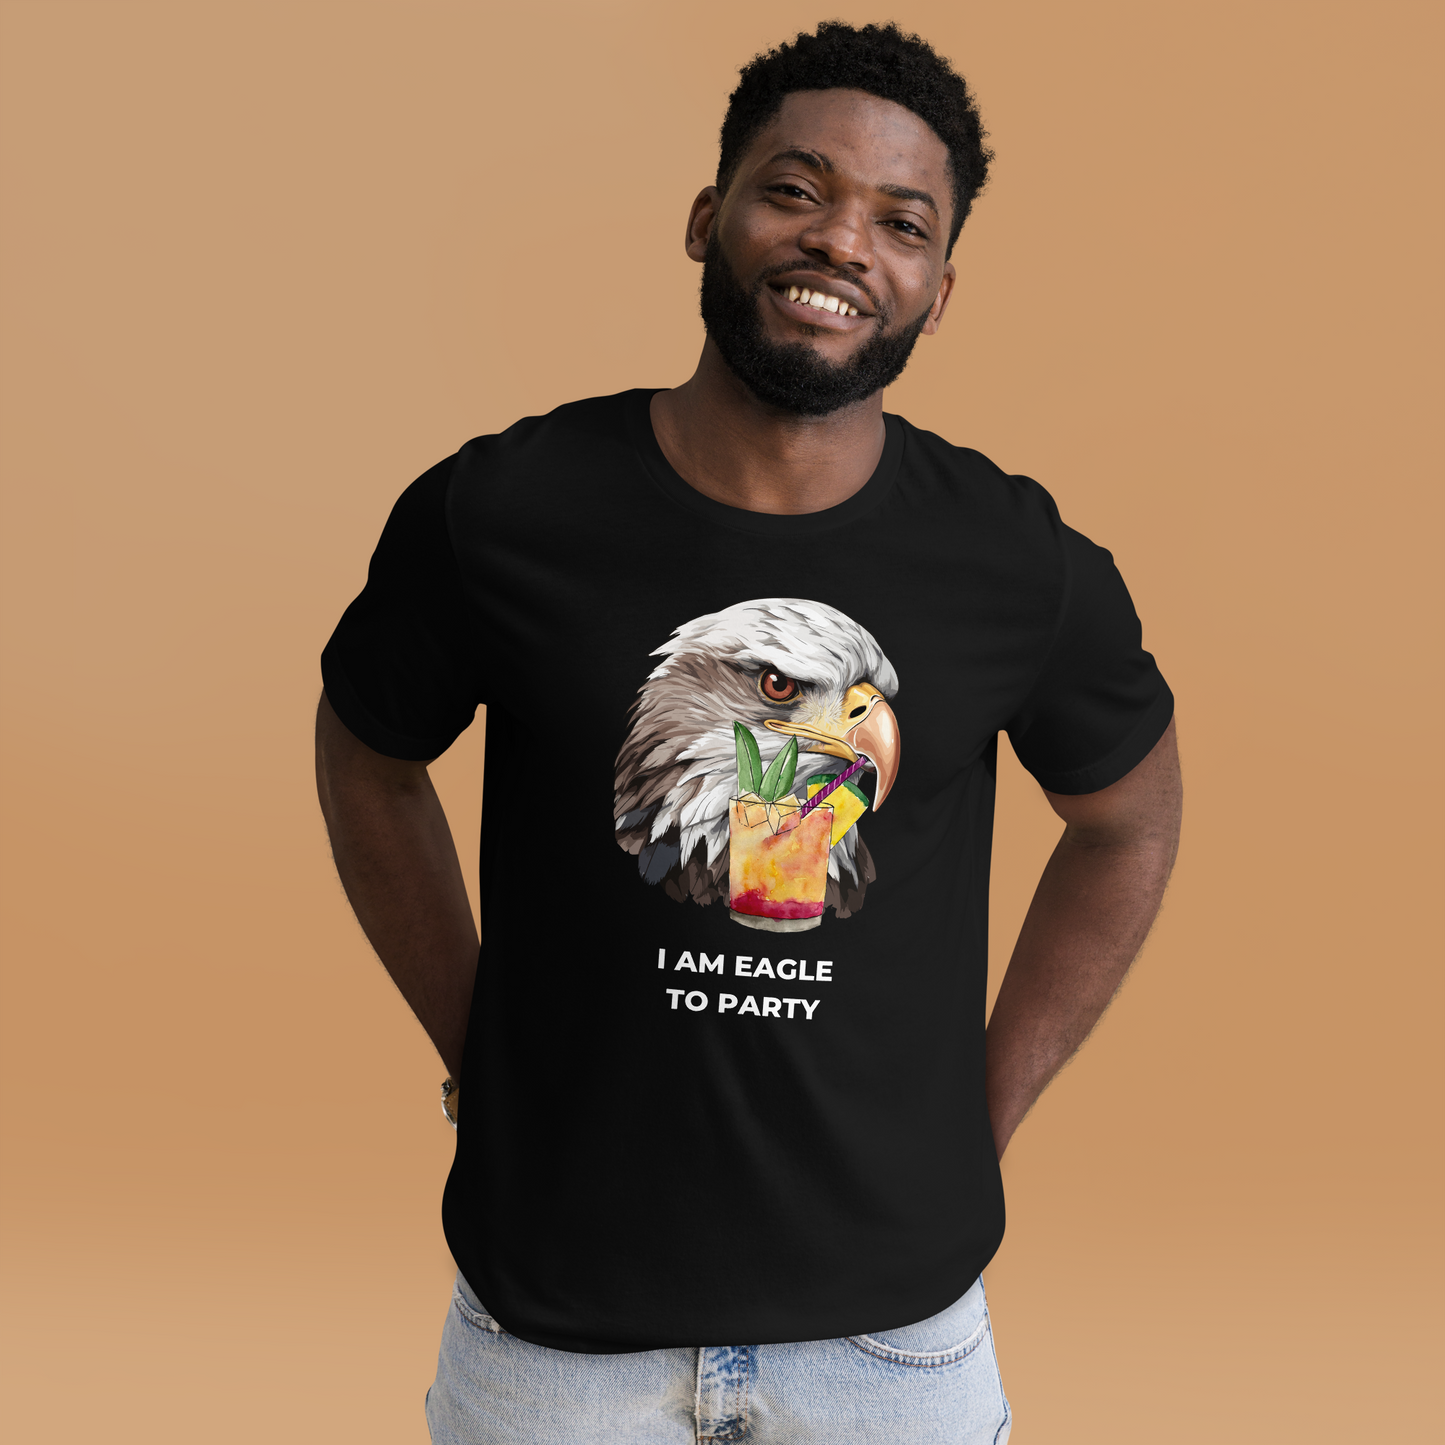 Smiling man wearing a Black Premium Eagle T-Shirt featuring an eye-catching I Am Eagle to Party graphic on the chest - Funny Graphic Eagle Tees - Boozy Fox